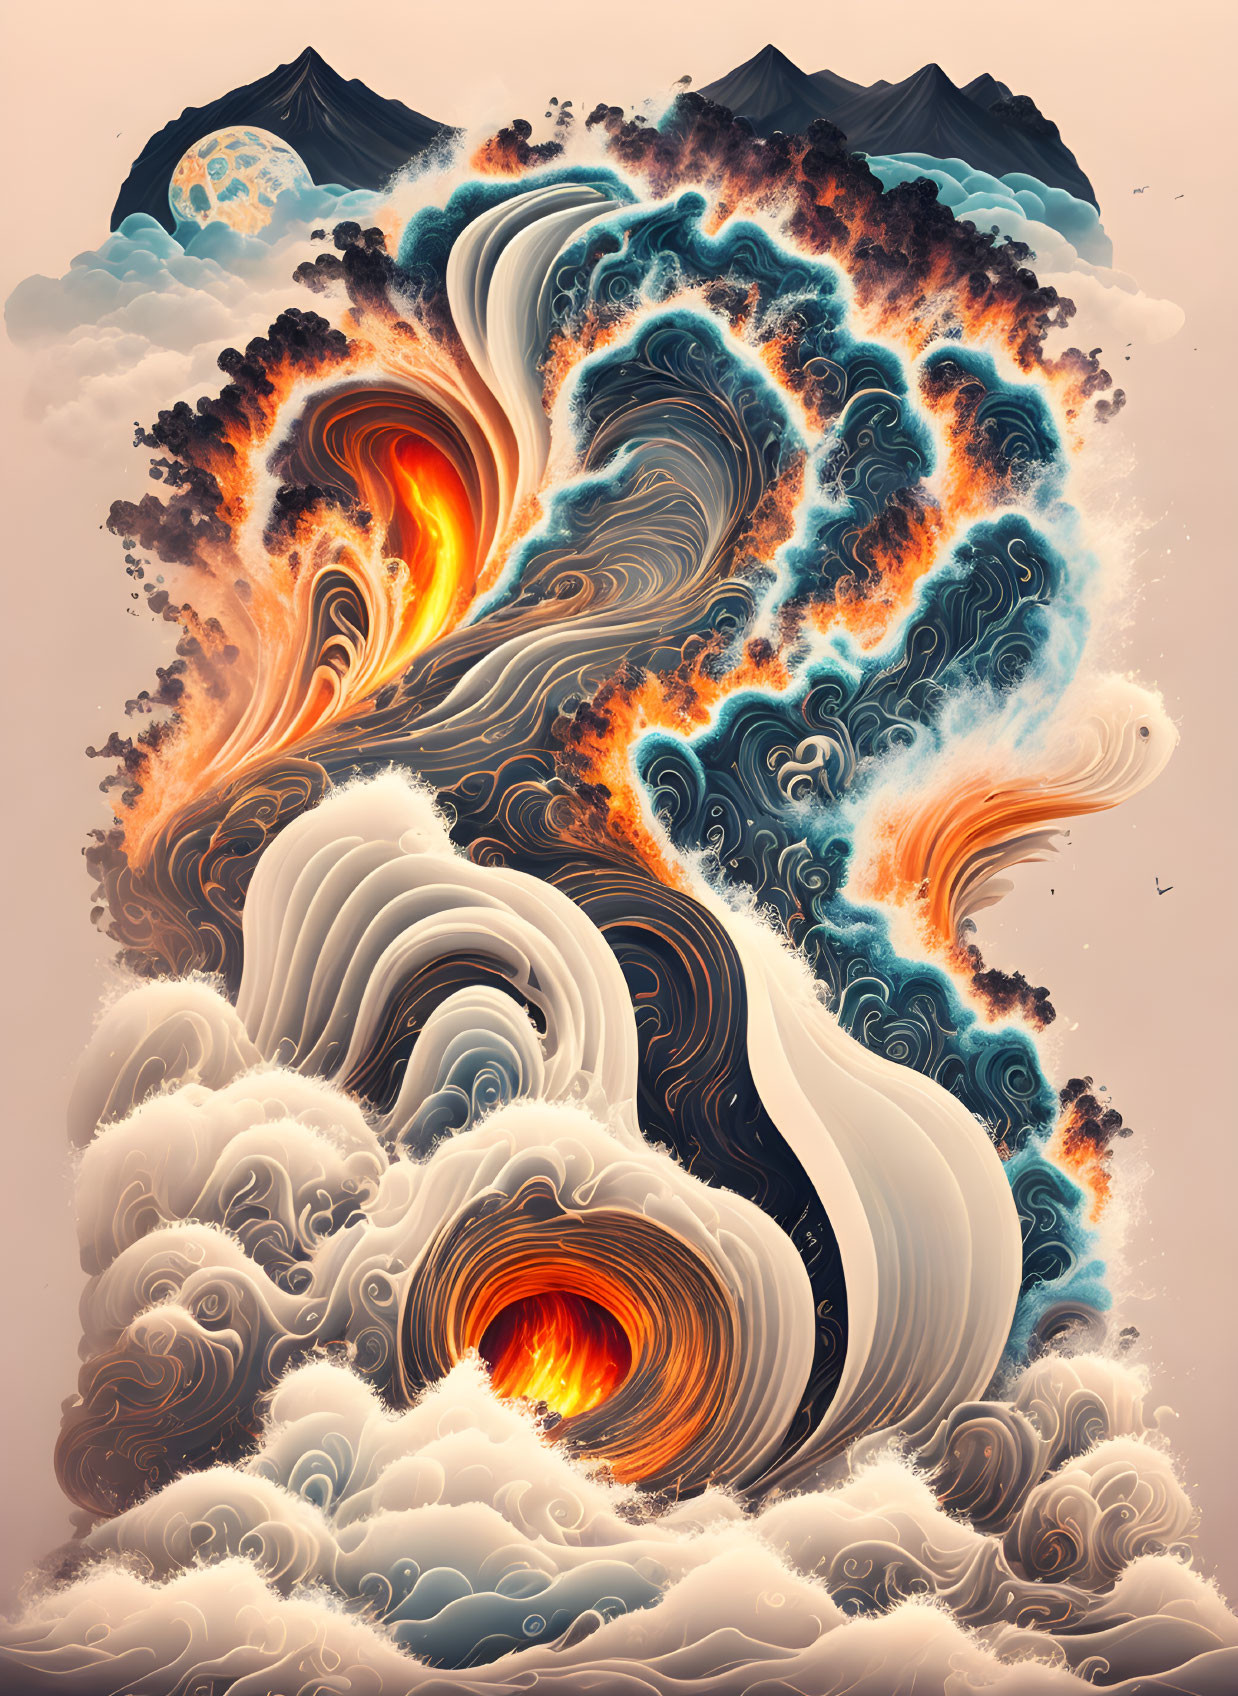 Surreal yin-yang wave with fire and water elements against mountain backdrop